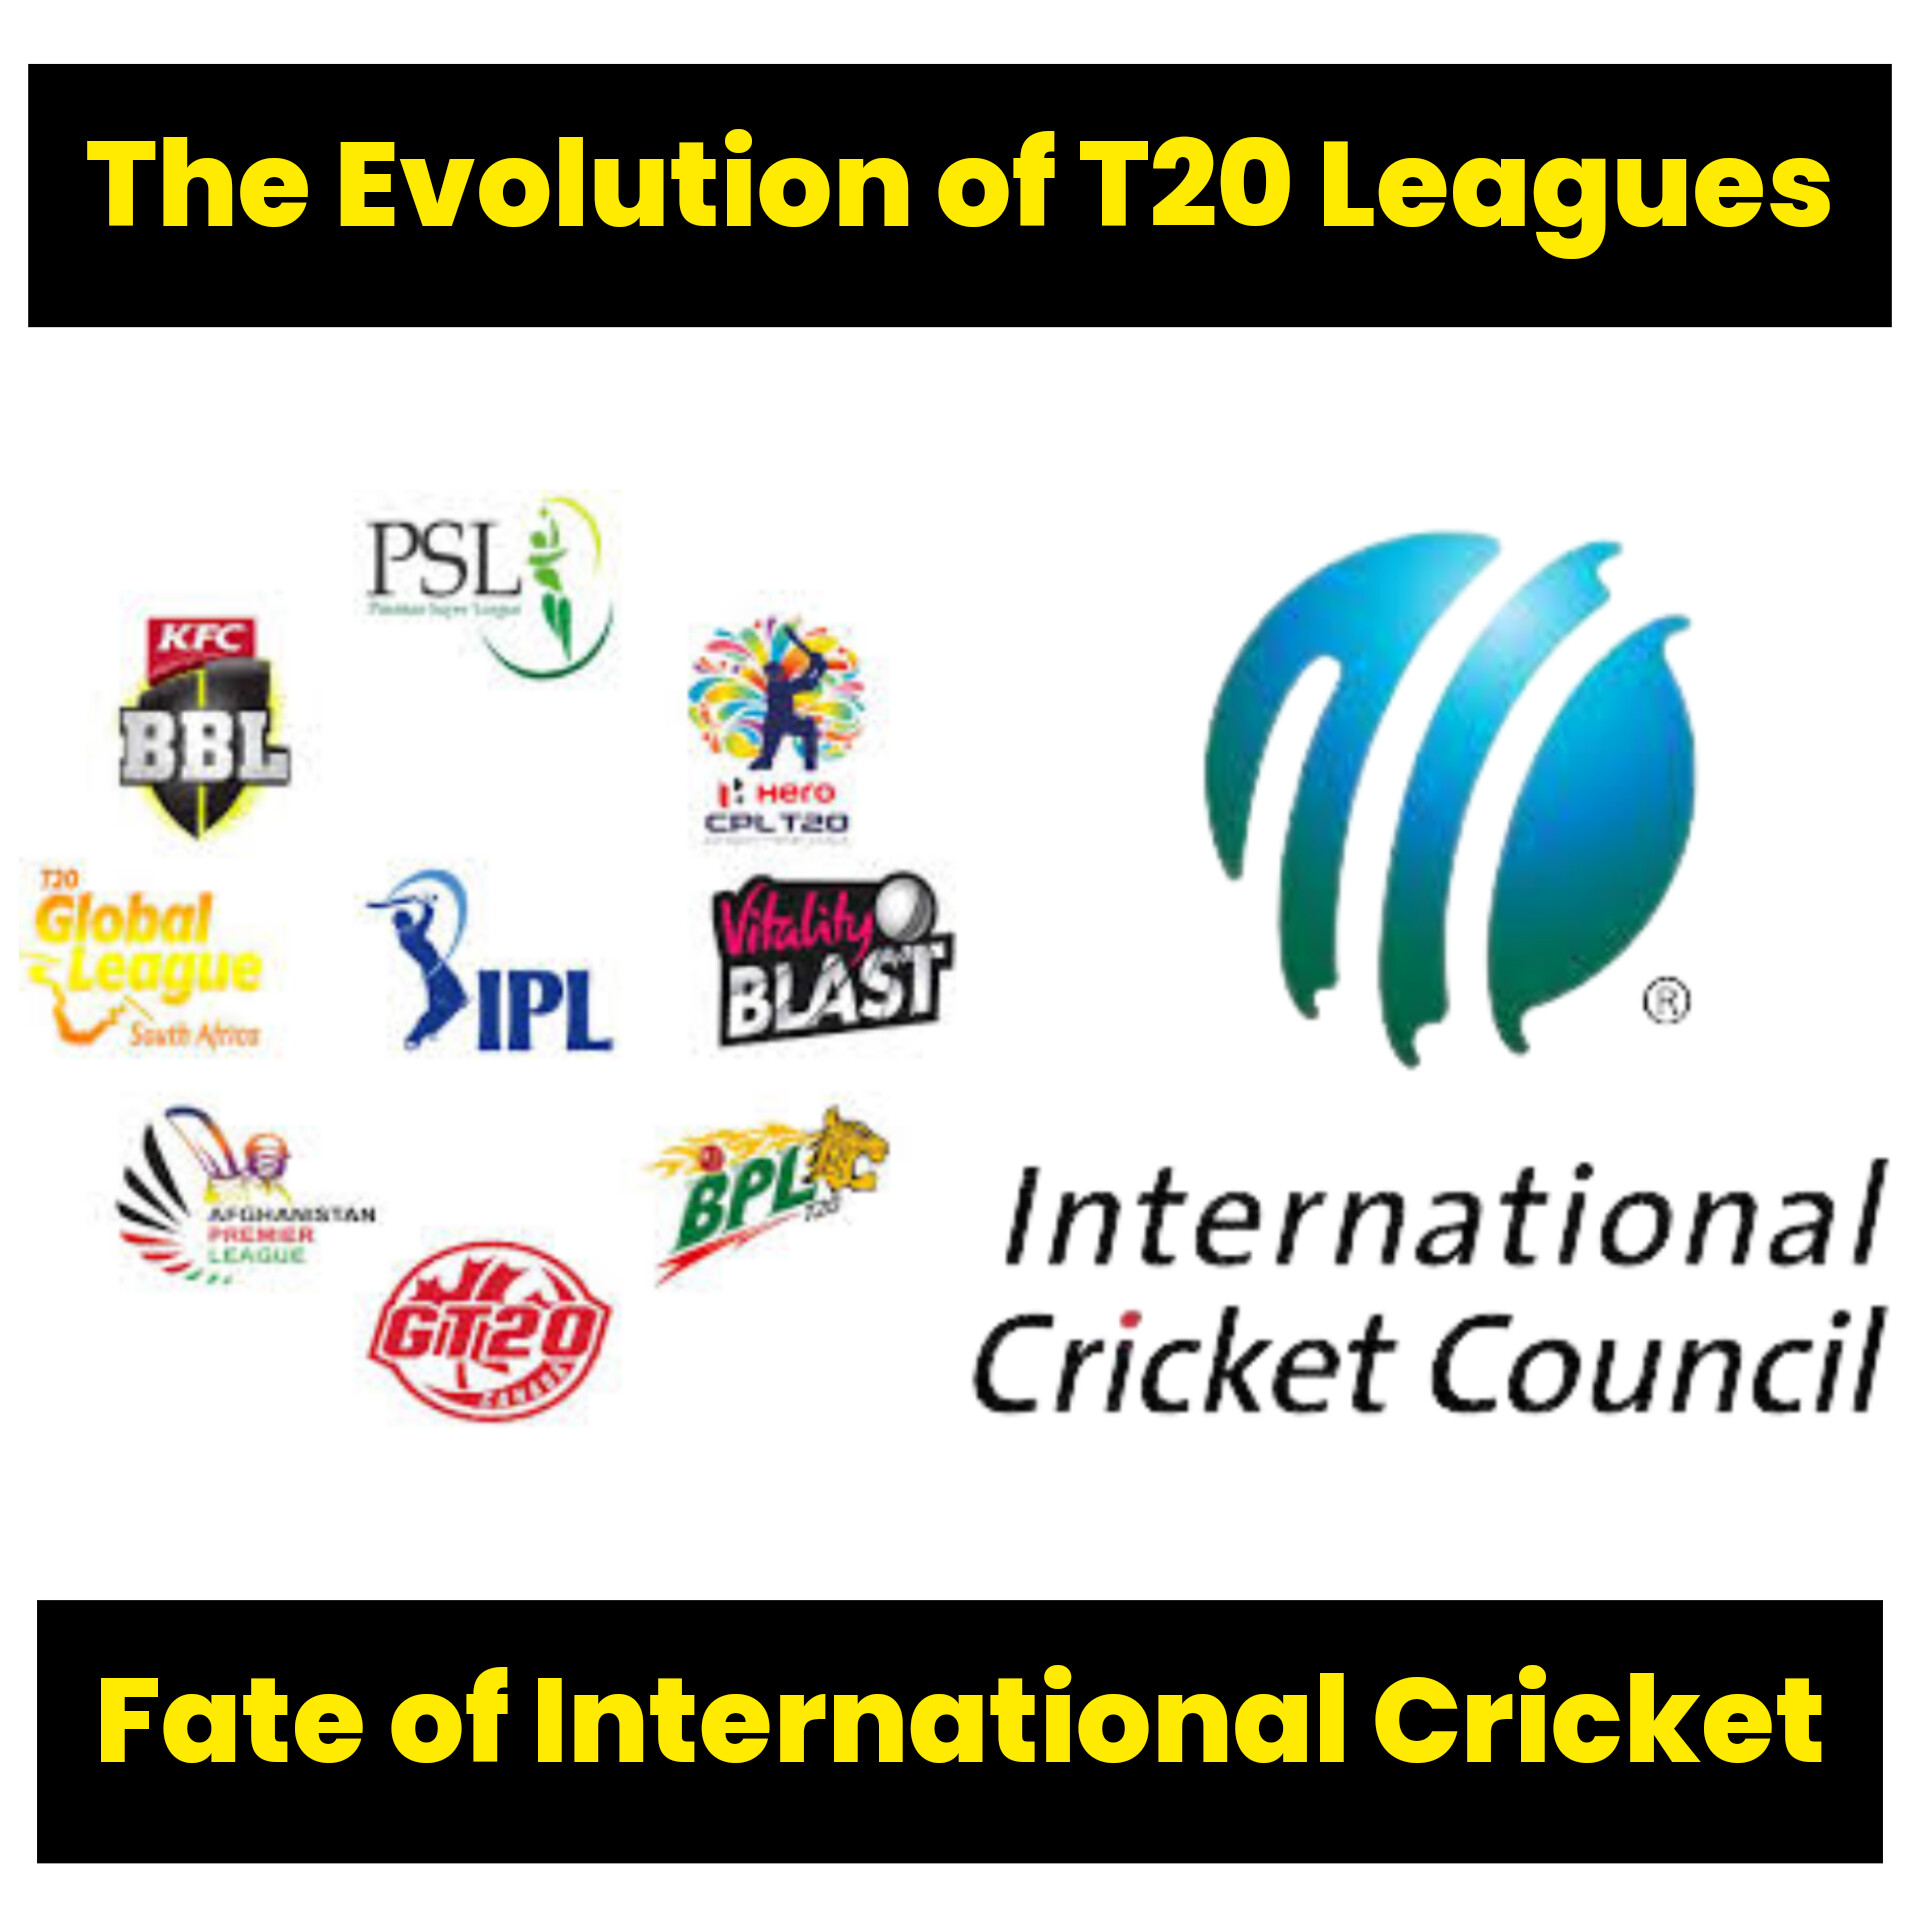 Evolution of T20 Leagues and Fate of International Cricket